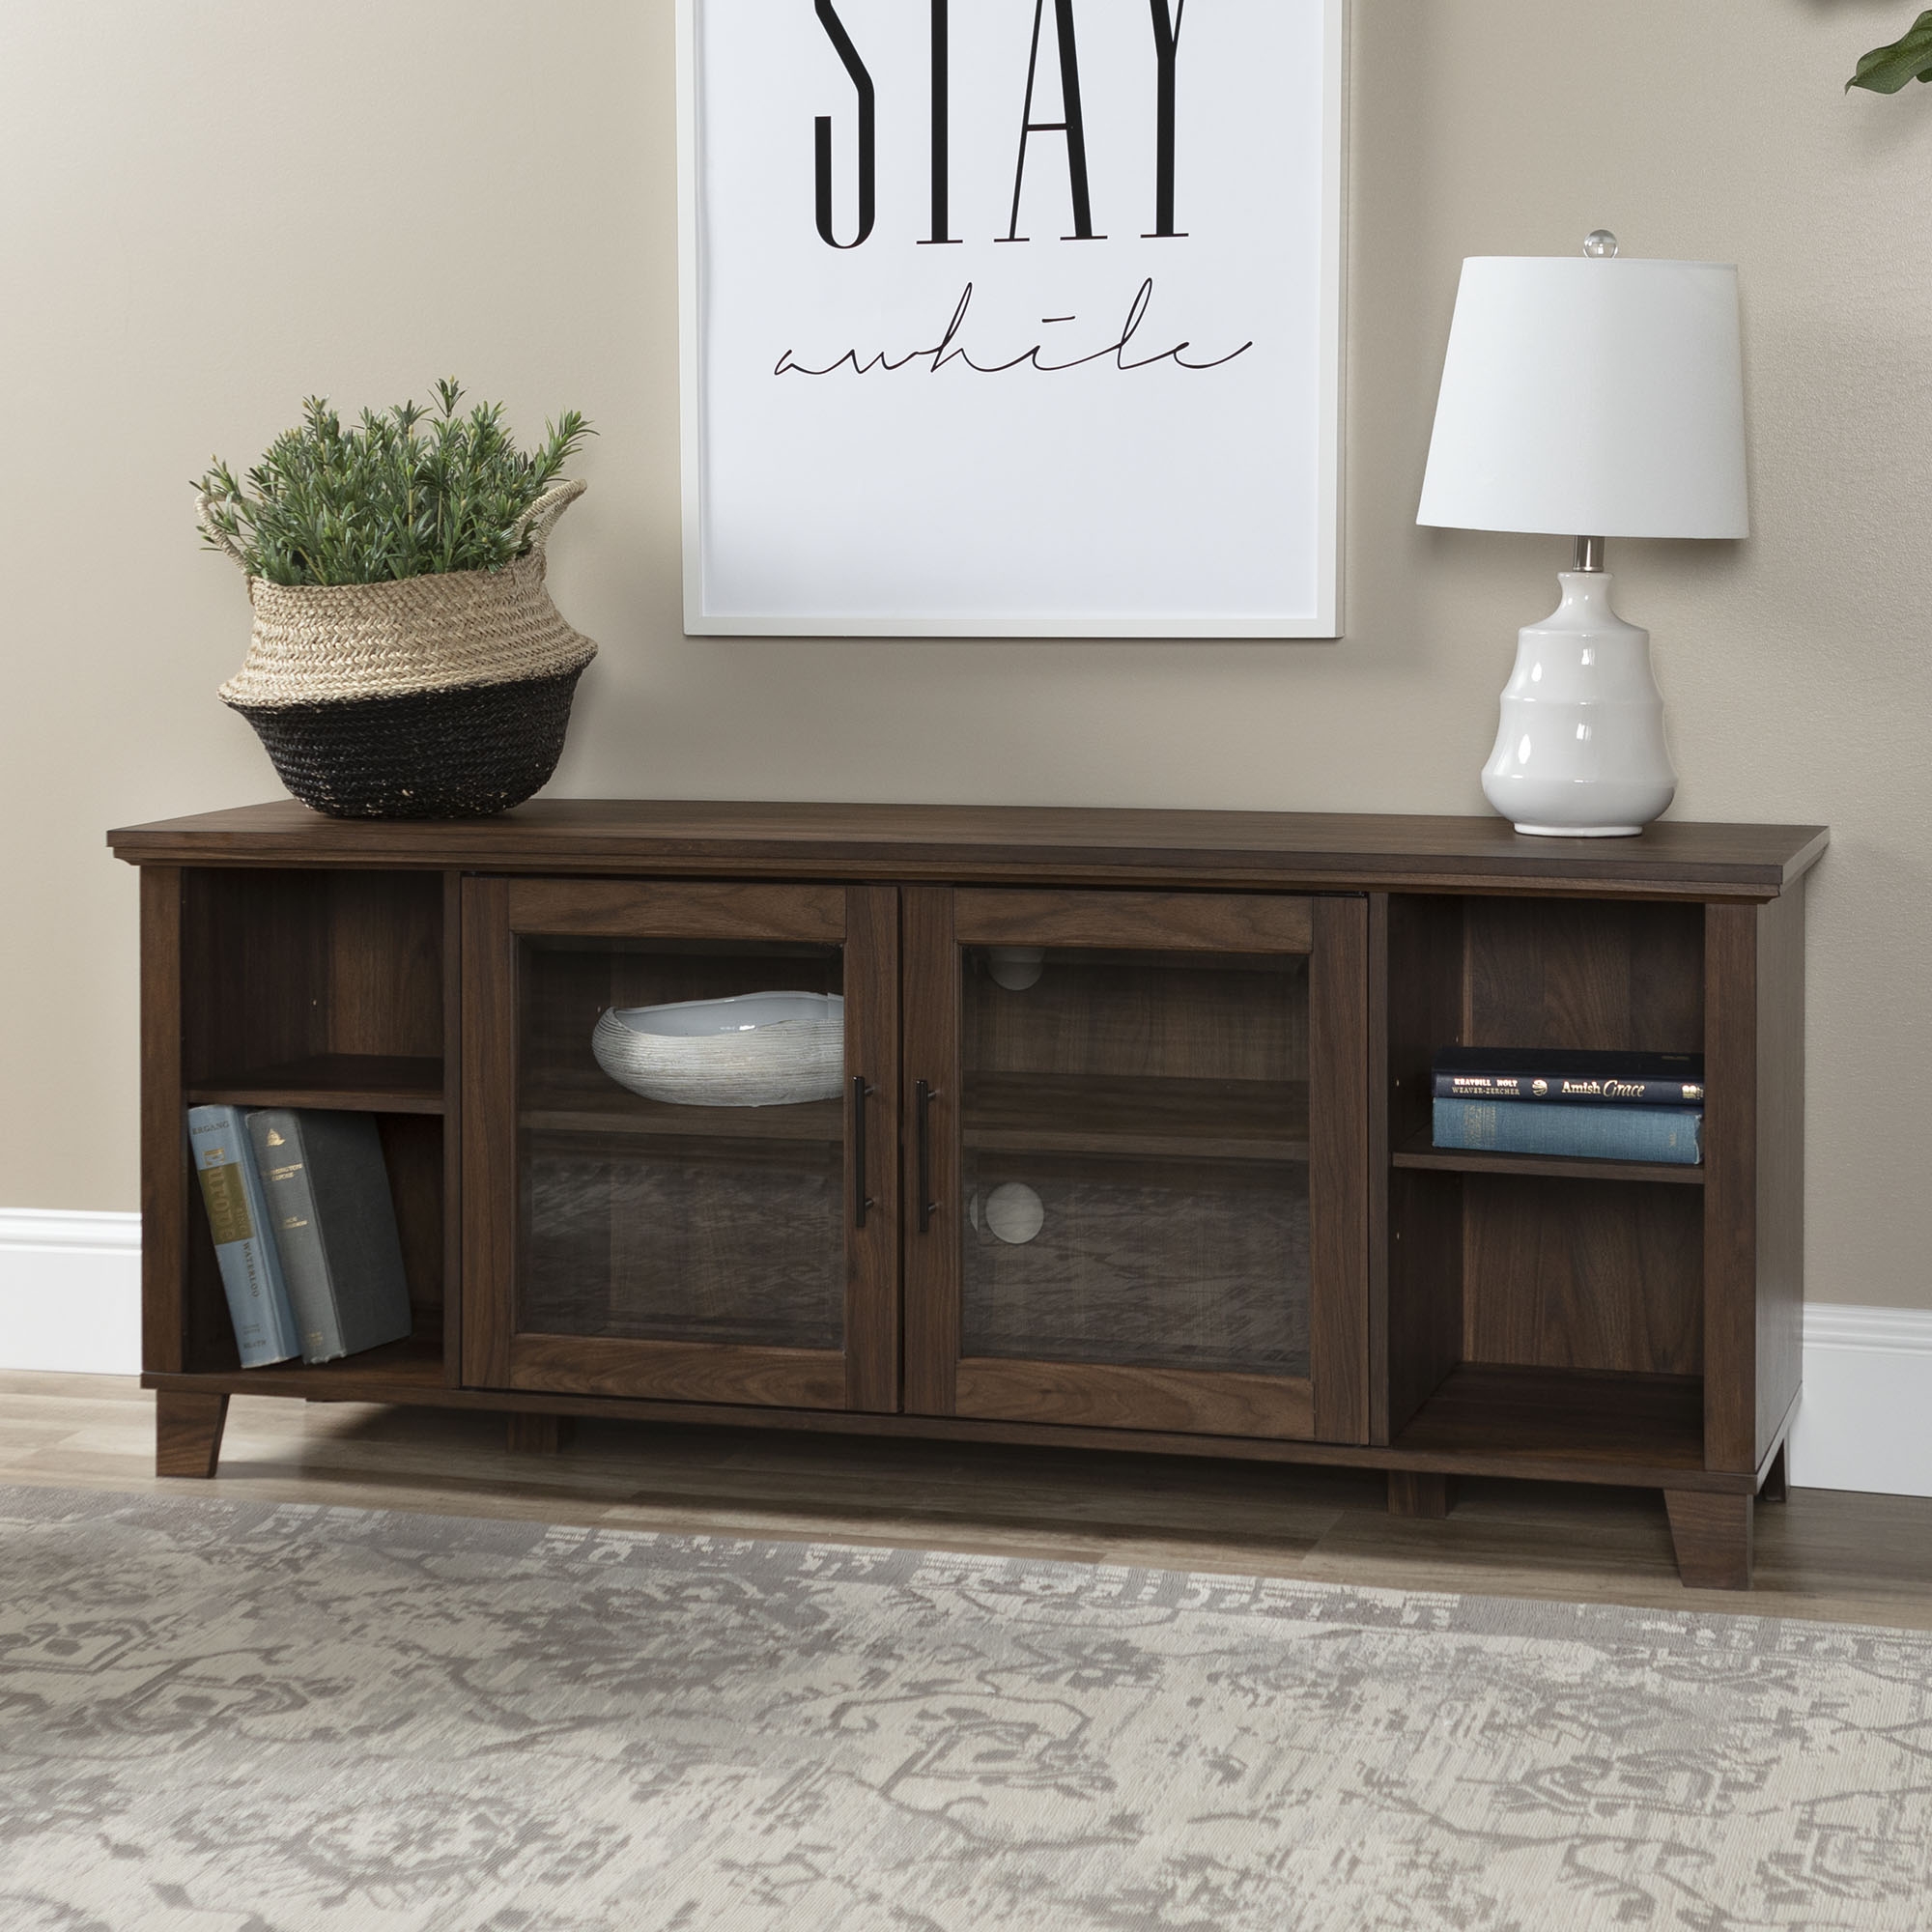 Columbus 58" TV Stand with Middle Doors - Dark Walnut - Image 4